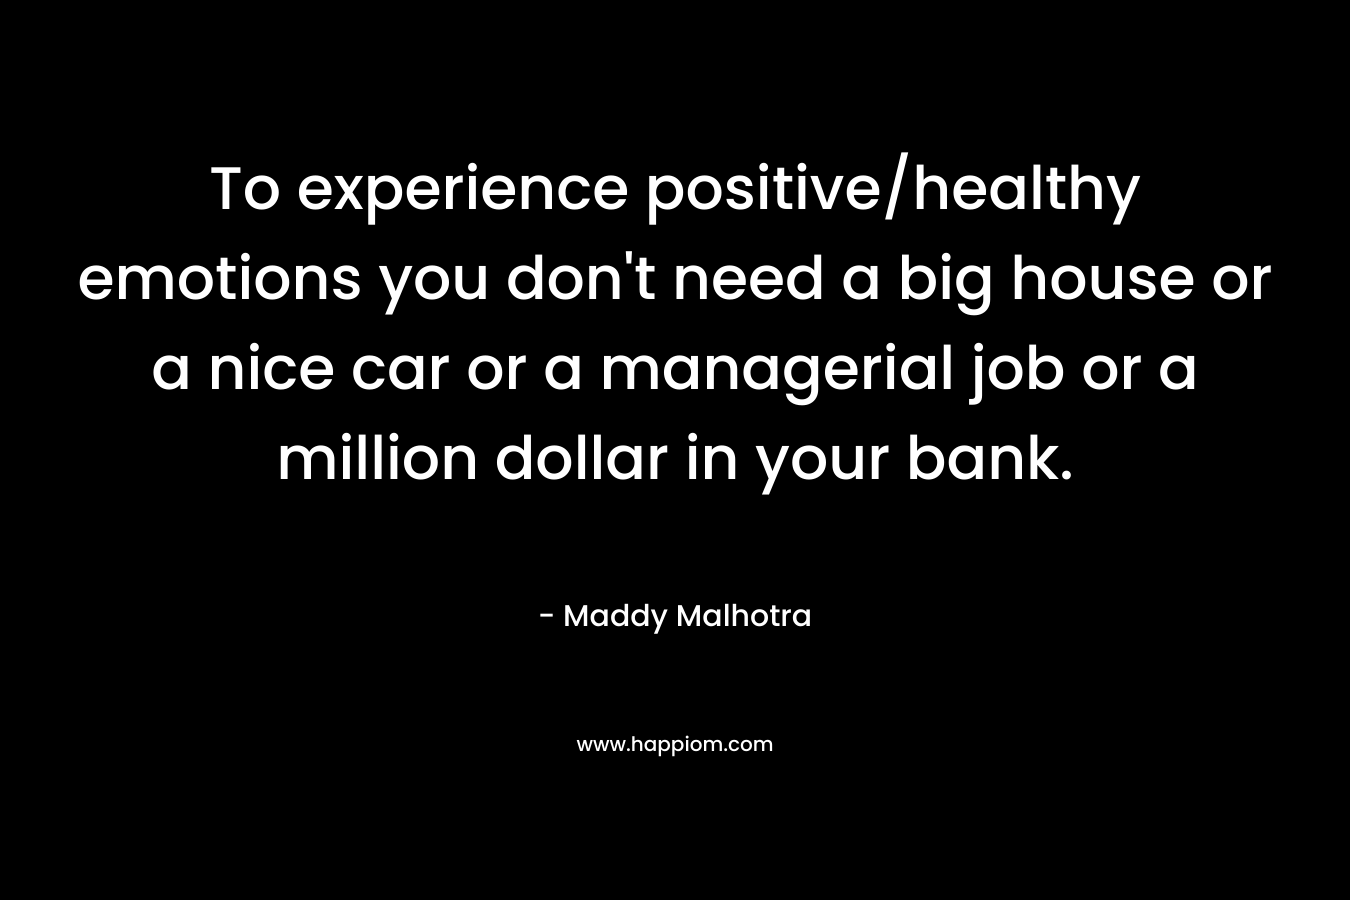 To experience positive/healthy emotions you don’t need a big house or a nice car or a managerial job or a million dollar in your bank. – Maddy Malhotra